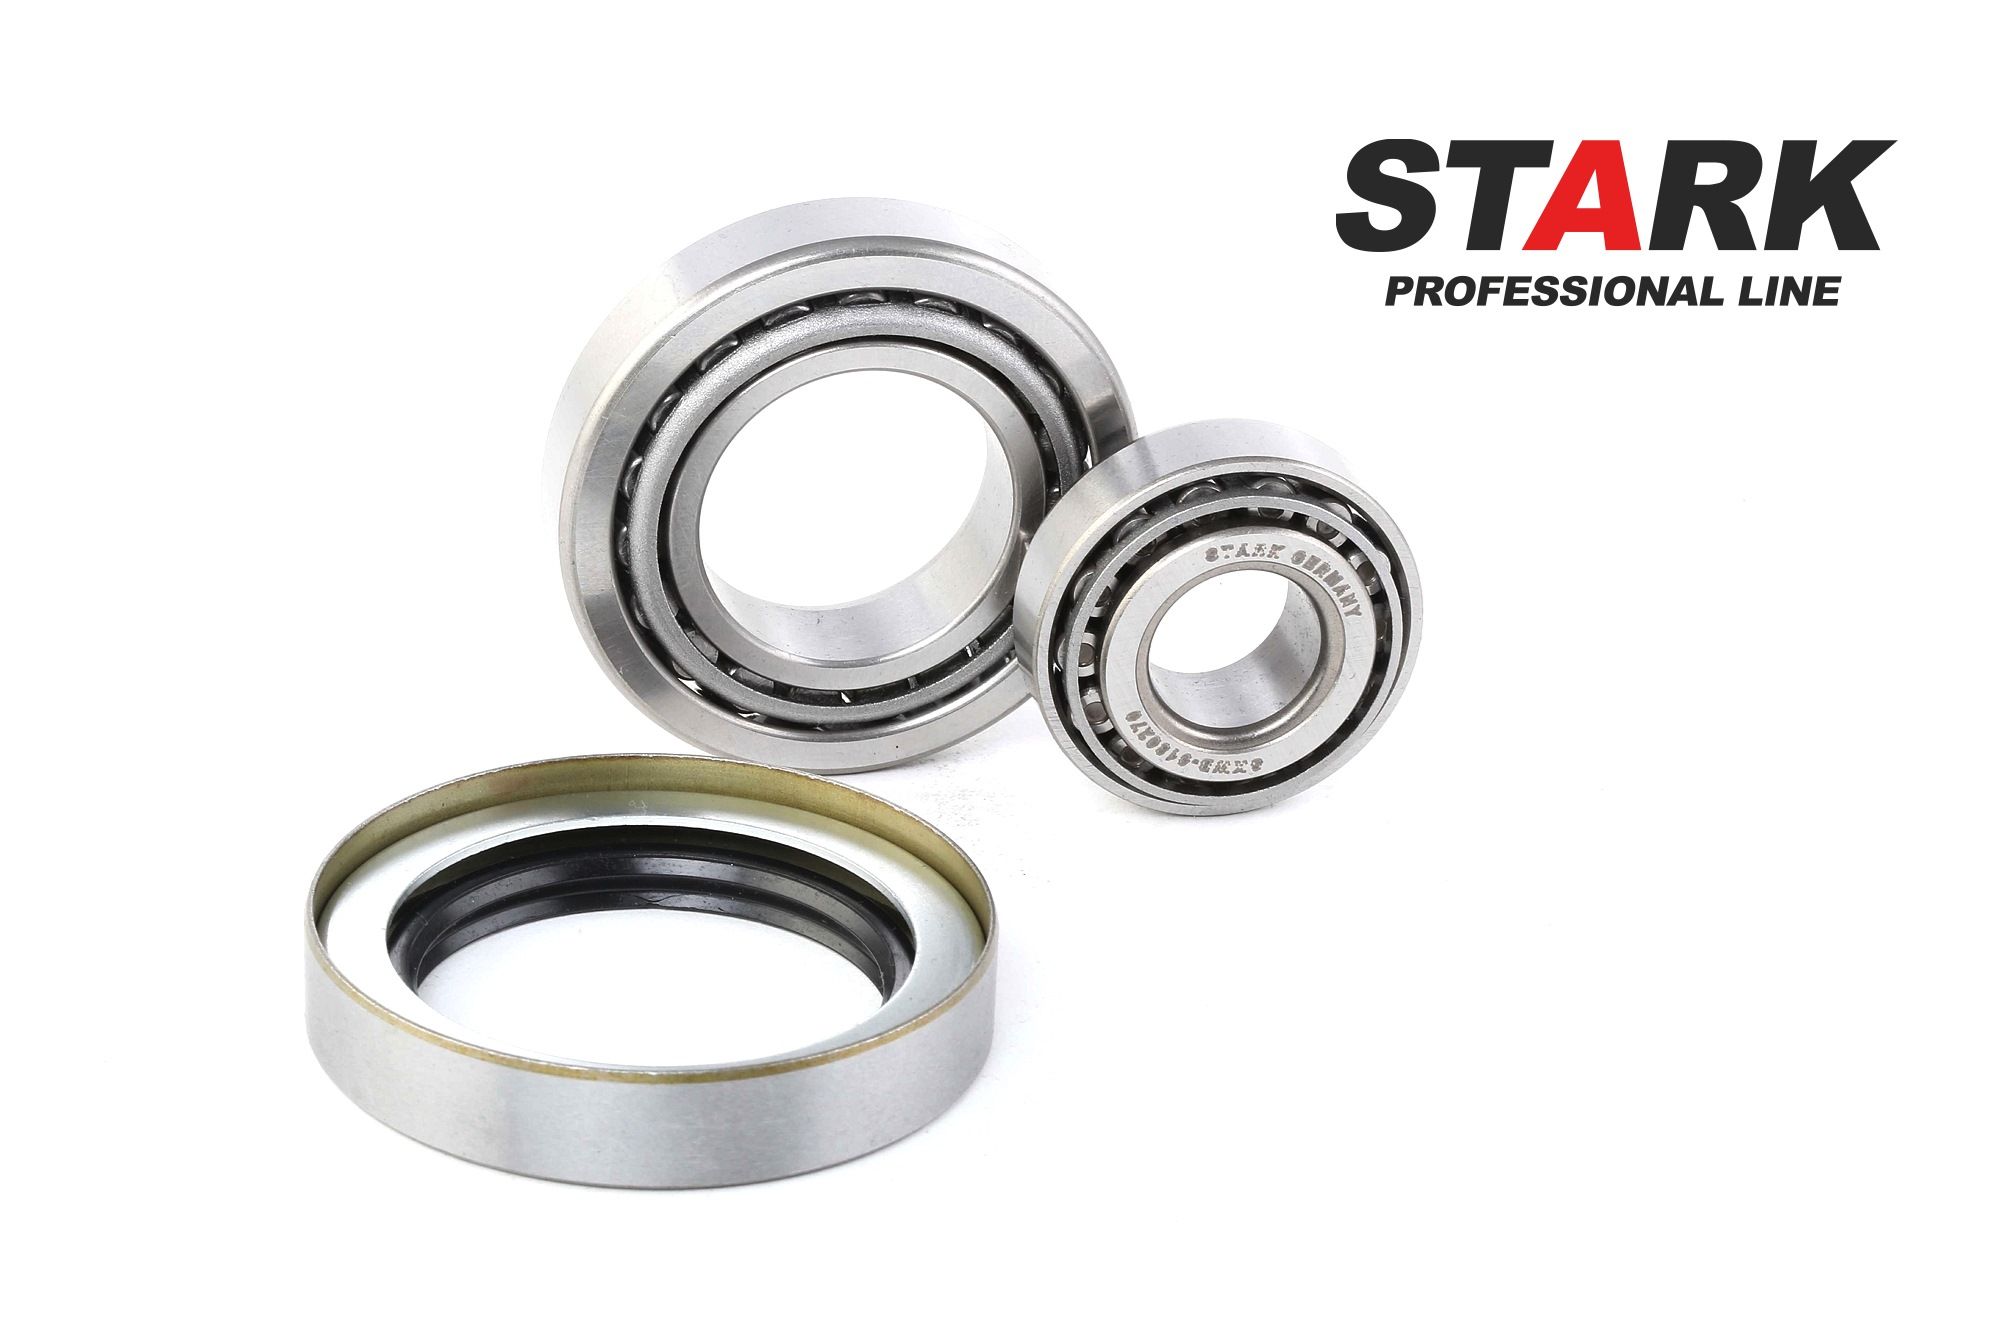 STARK SKWB-0180270 Wheel bearing kit Front axle both sides, with attachment material, 50,3, 39,9, 59,1 mm